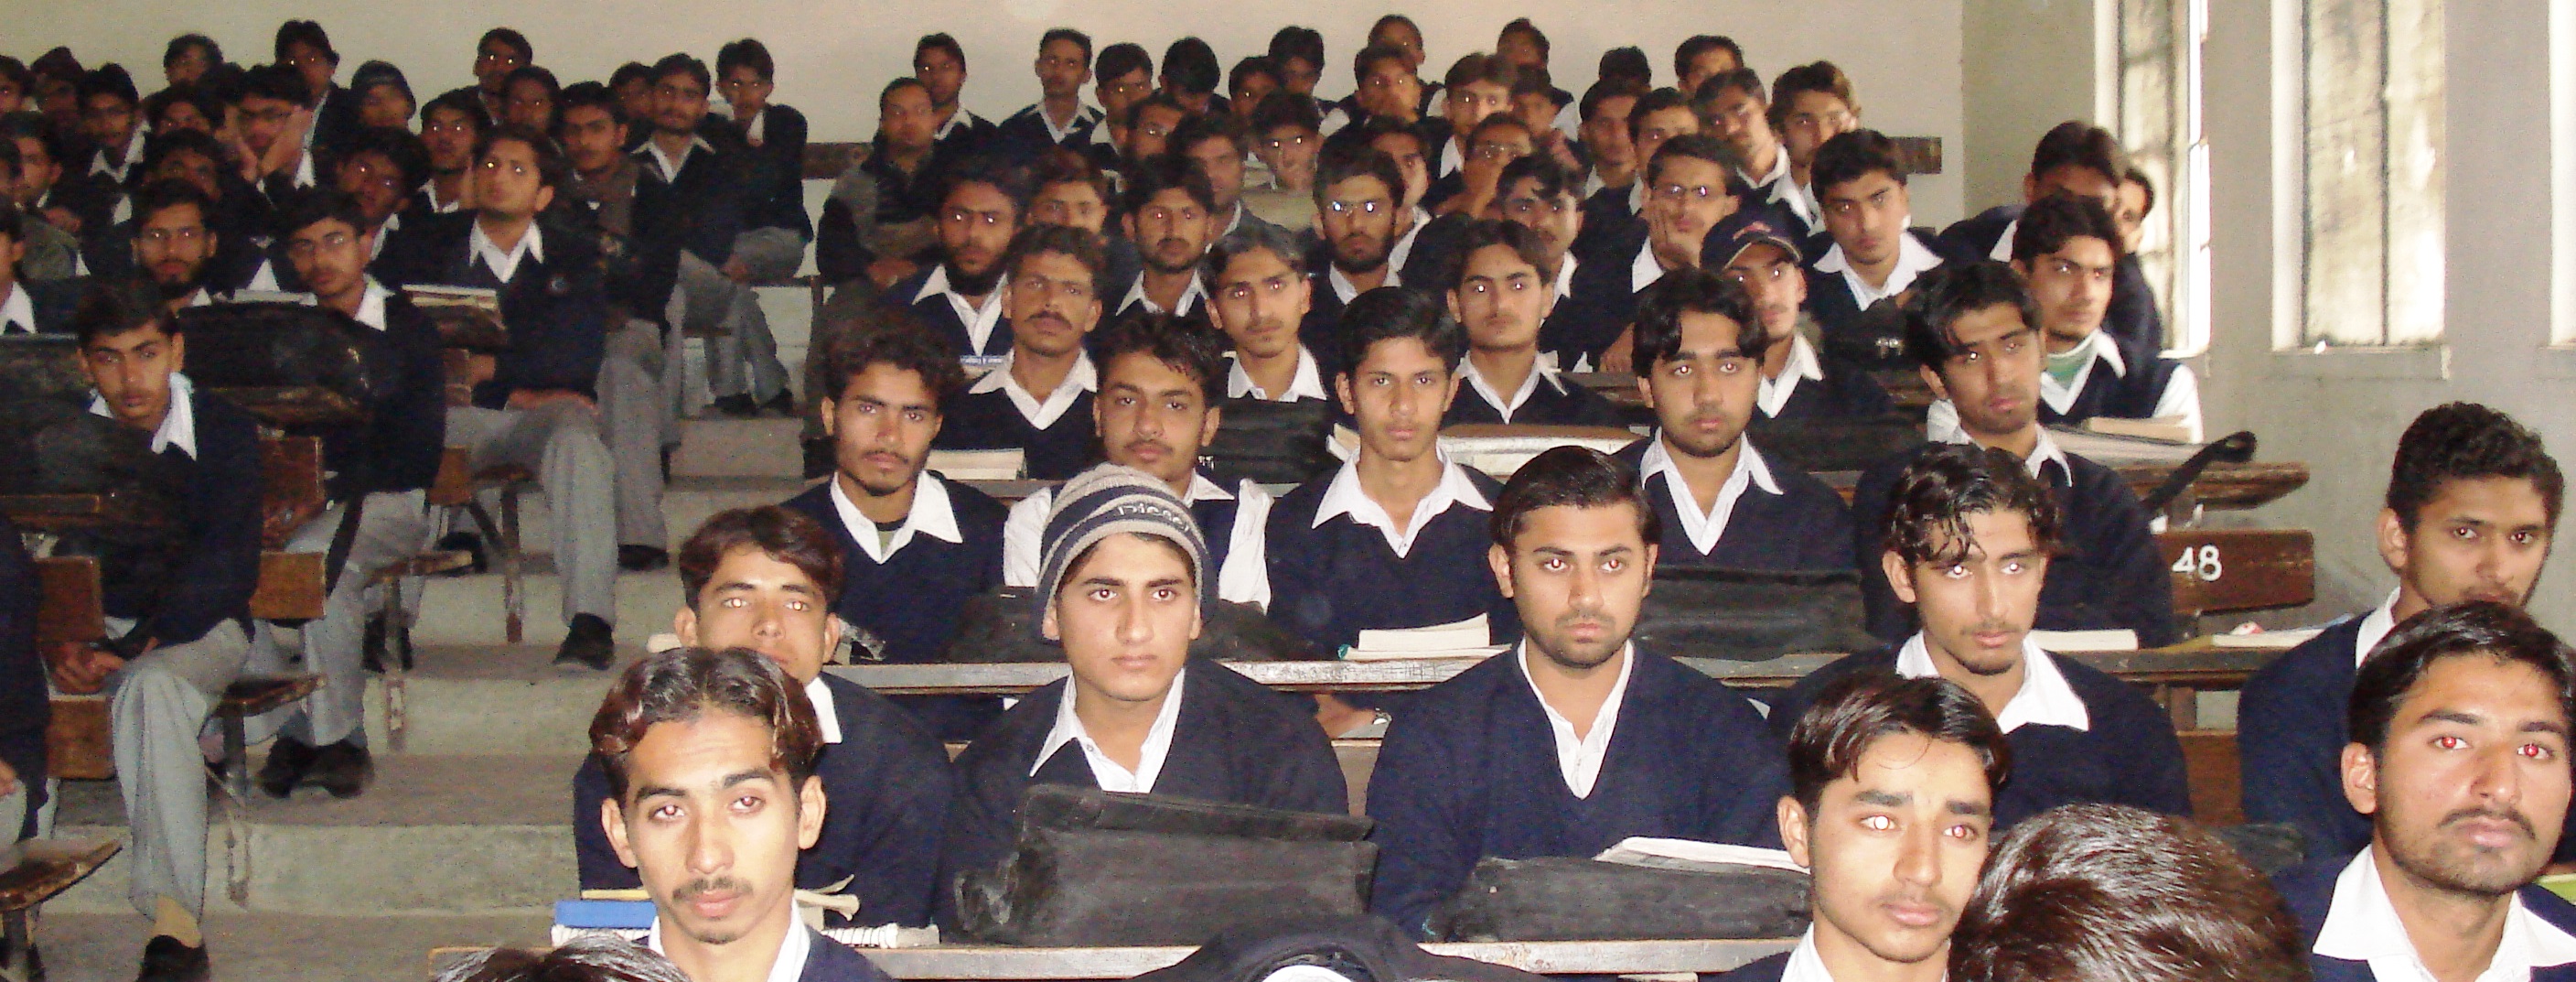 Seminar on Career Counseling in Faisalabad